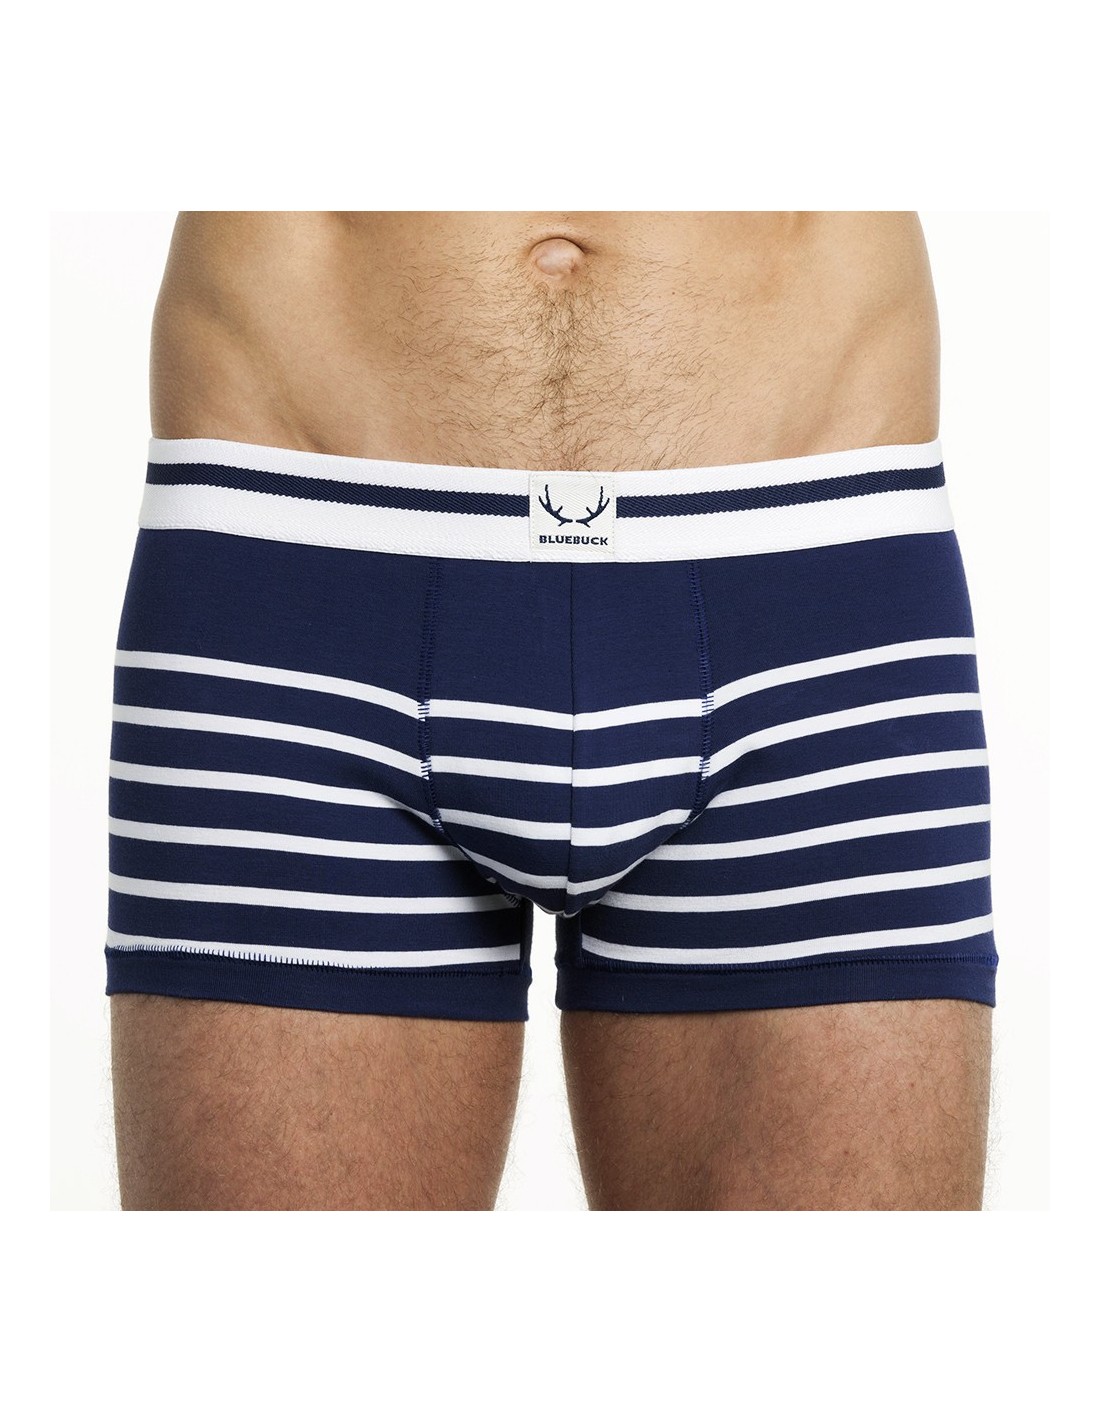 Bluebuck - Blue Trunks With Stripes | Men And Underwear